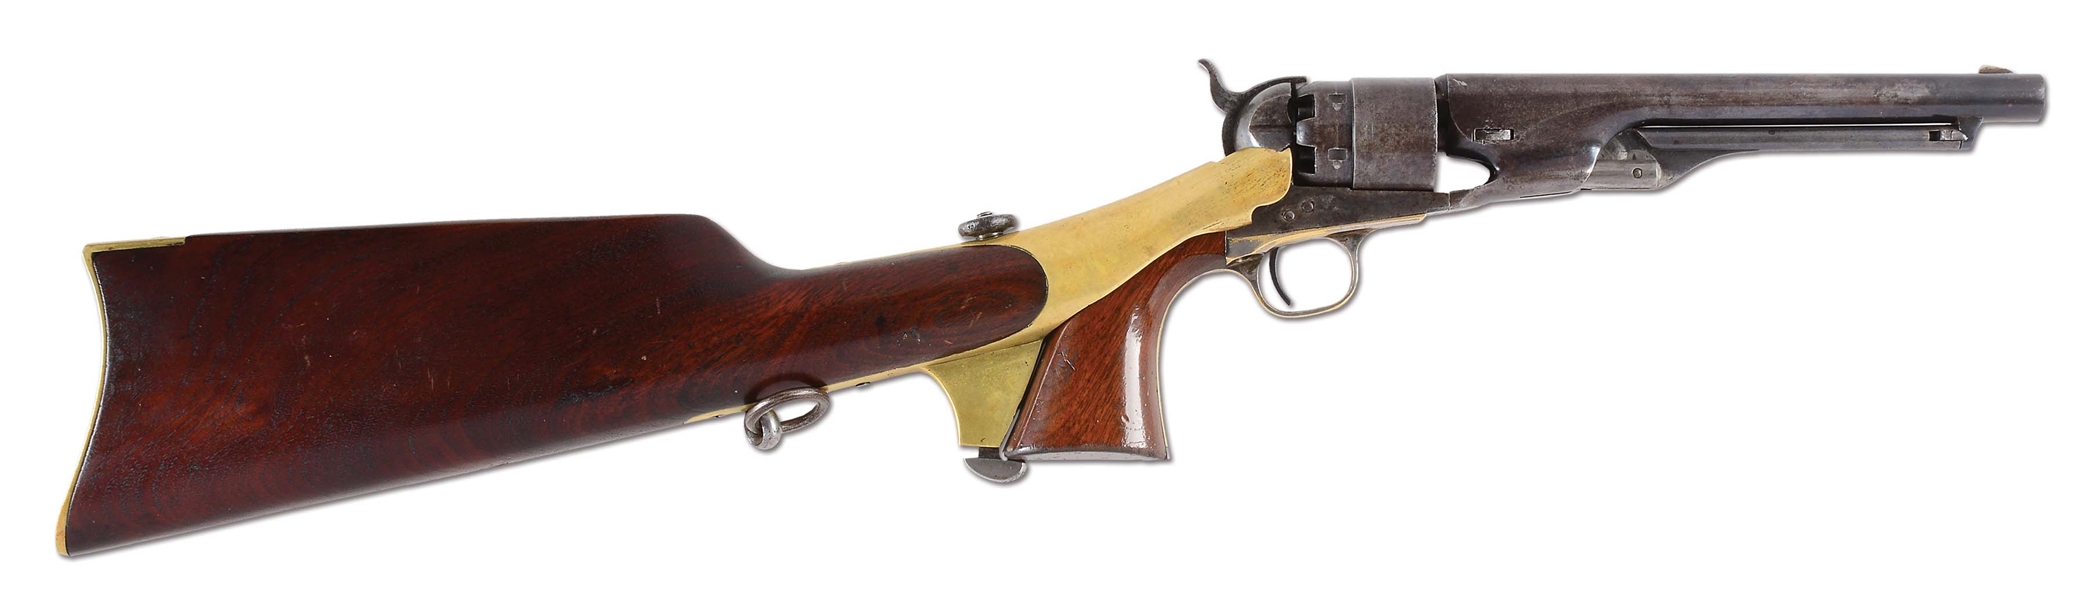 (A) COLT MODEL 1860 ARMY PERCUSSION REVOLVER WITH DETACHABLE SHOULDER STOCK (1863).